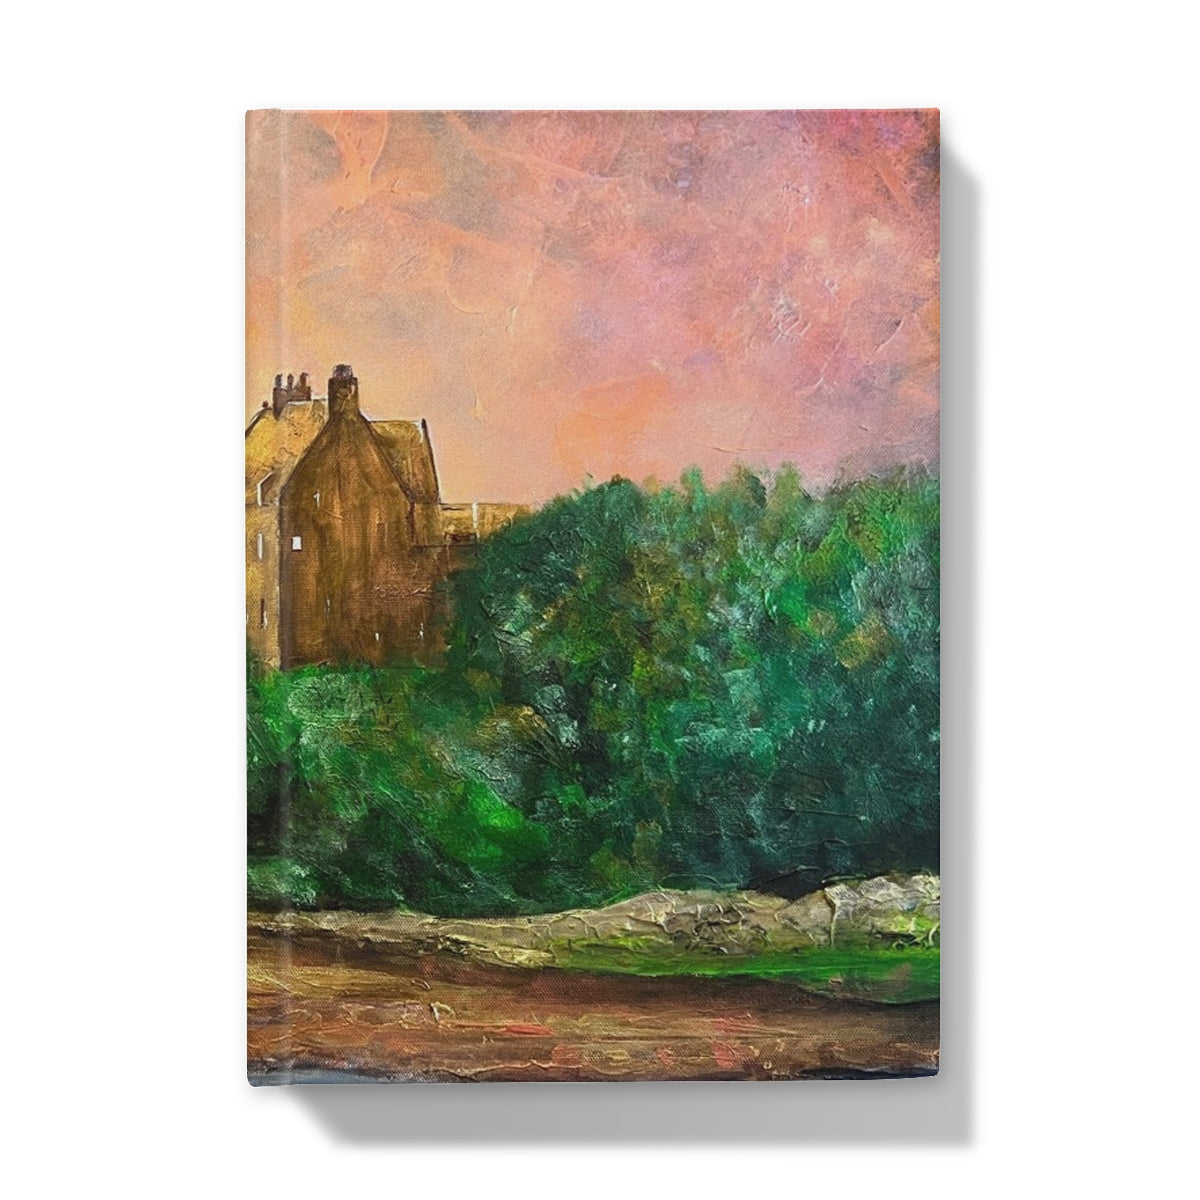 Duntrune Castle Art Gifts Hardback Journal-Journals & Notebooks-Historic & Iconic Scotland Art Gallery-5"x7"-Lined-Paintings, Prints, Homeware, Art Gifts From Scotland By Scottish Artist Kevin Hunter